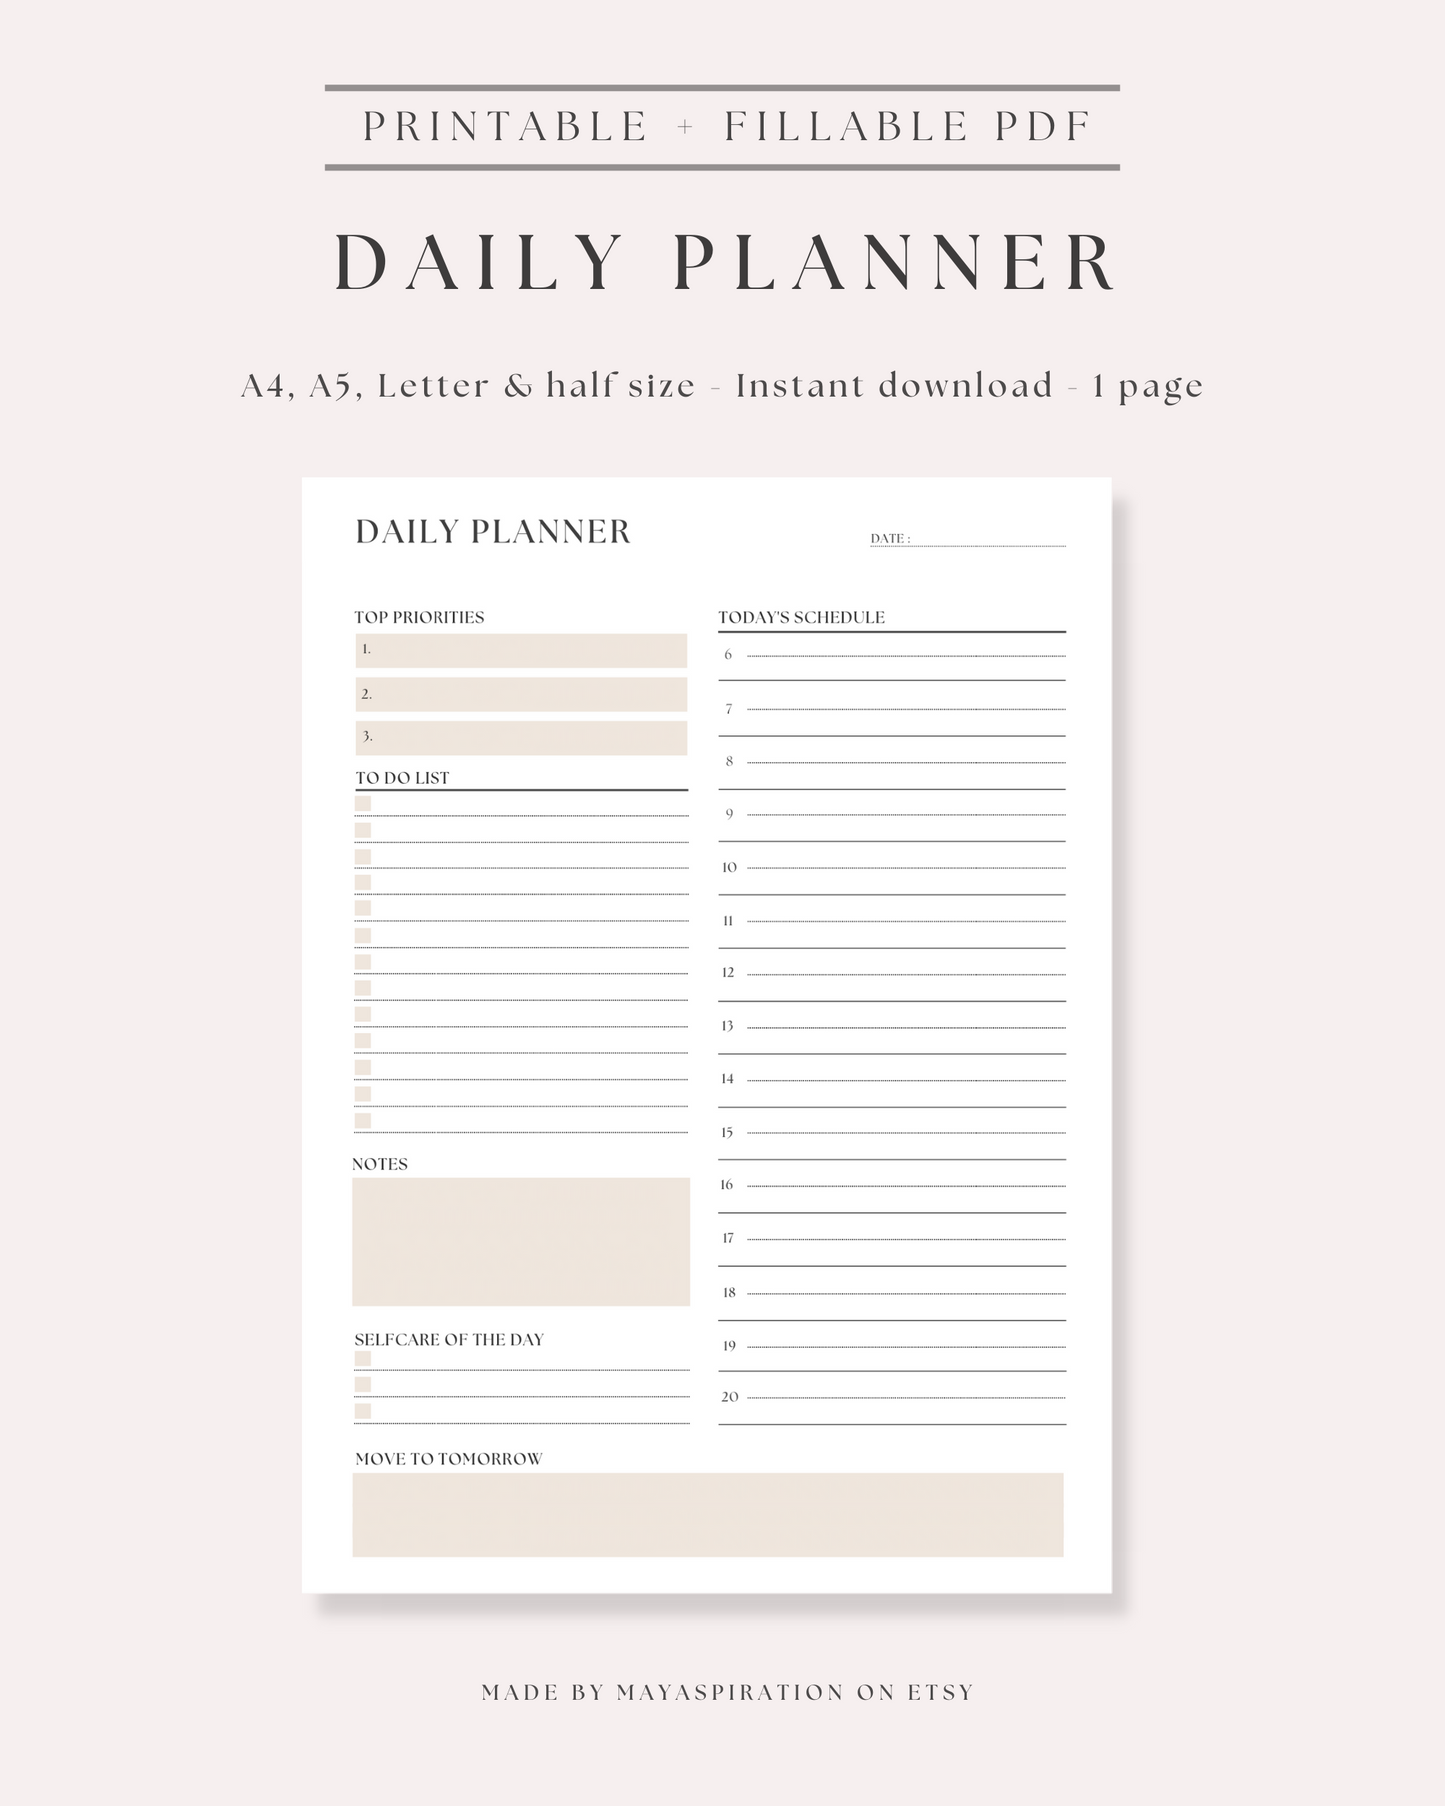 Plan for success – Daily planner insert